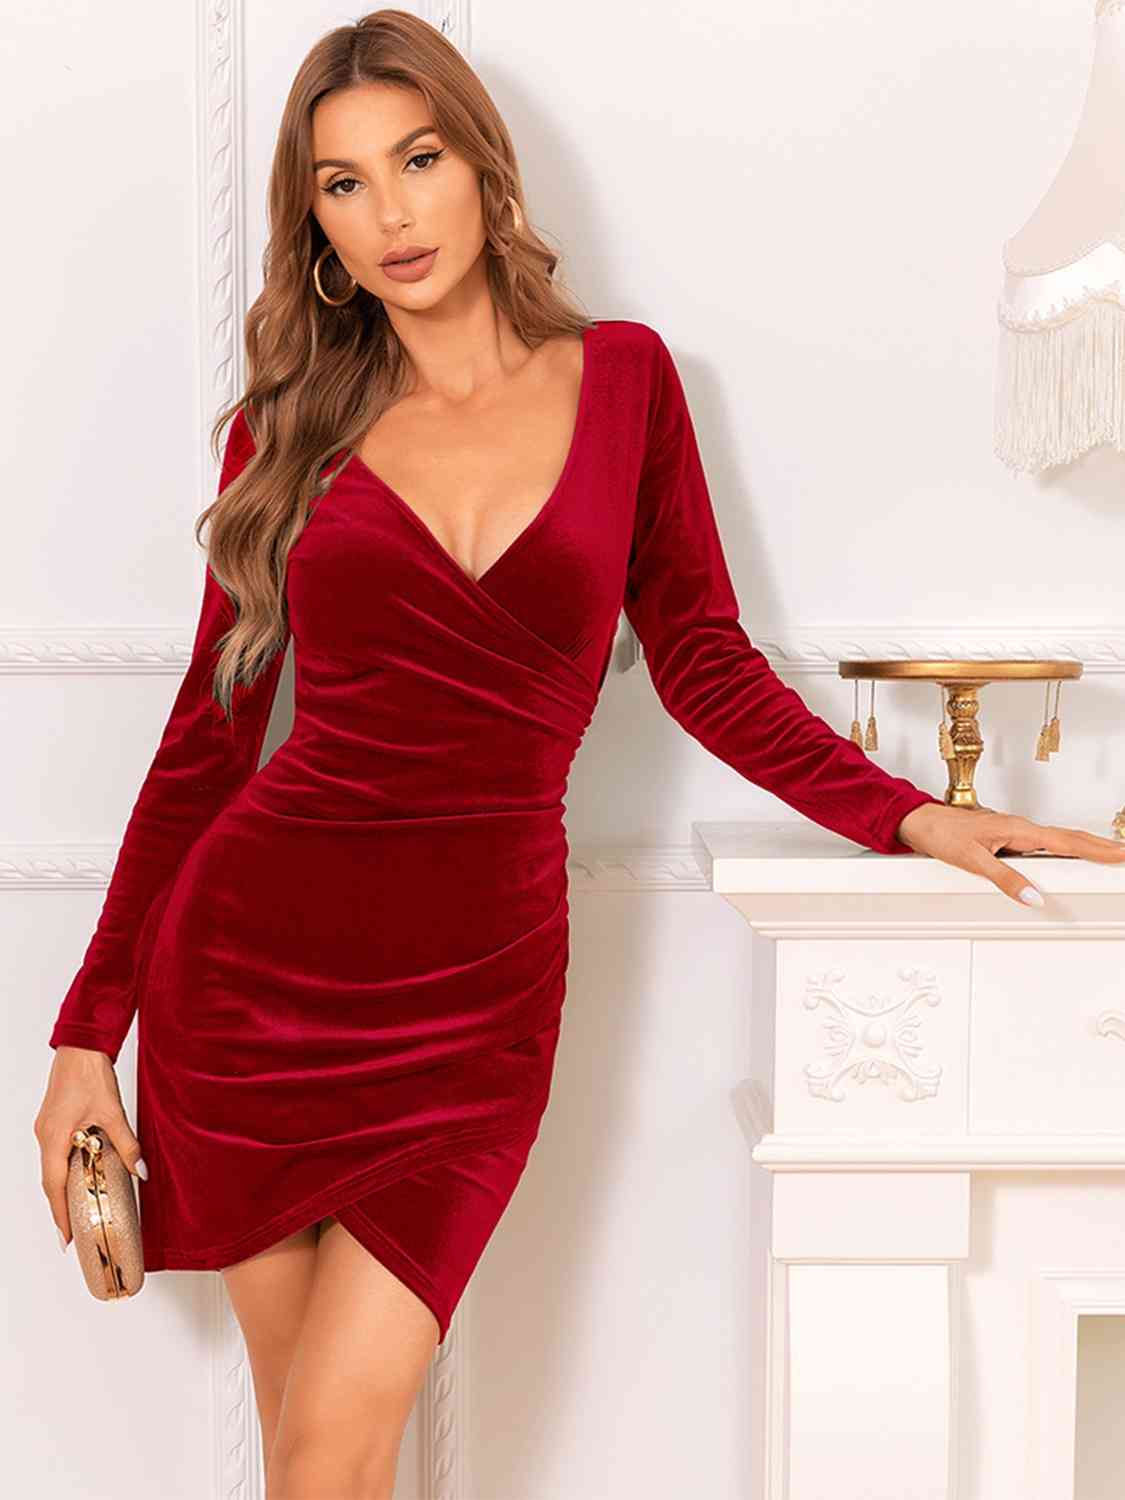 Long Sleeve Tulip Hem Dress - Kawaii Stop - Chic Ensemble, Confidence and Elegance, Dress Up for Any Occasion, Fashion Forward, H#Y, Long Sleeve Fashion, Must-Have Dress, Opaque Finish, Ruched Details, Ship From Overseas, Stylish Outfit, Trendy Attire, Tulip Hem Dress, Versatile Dress, Wardrobe Essential, Women's Fashion